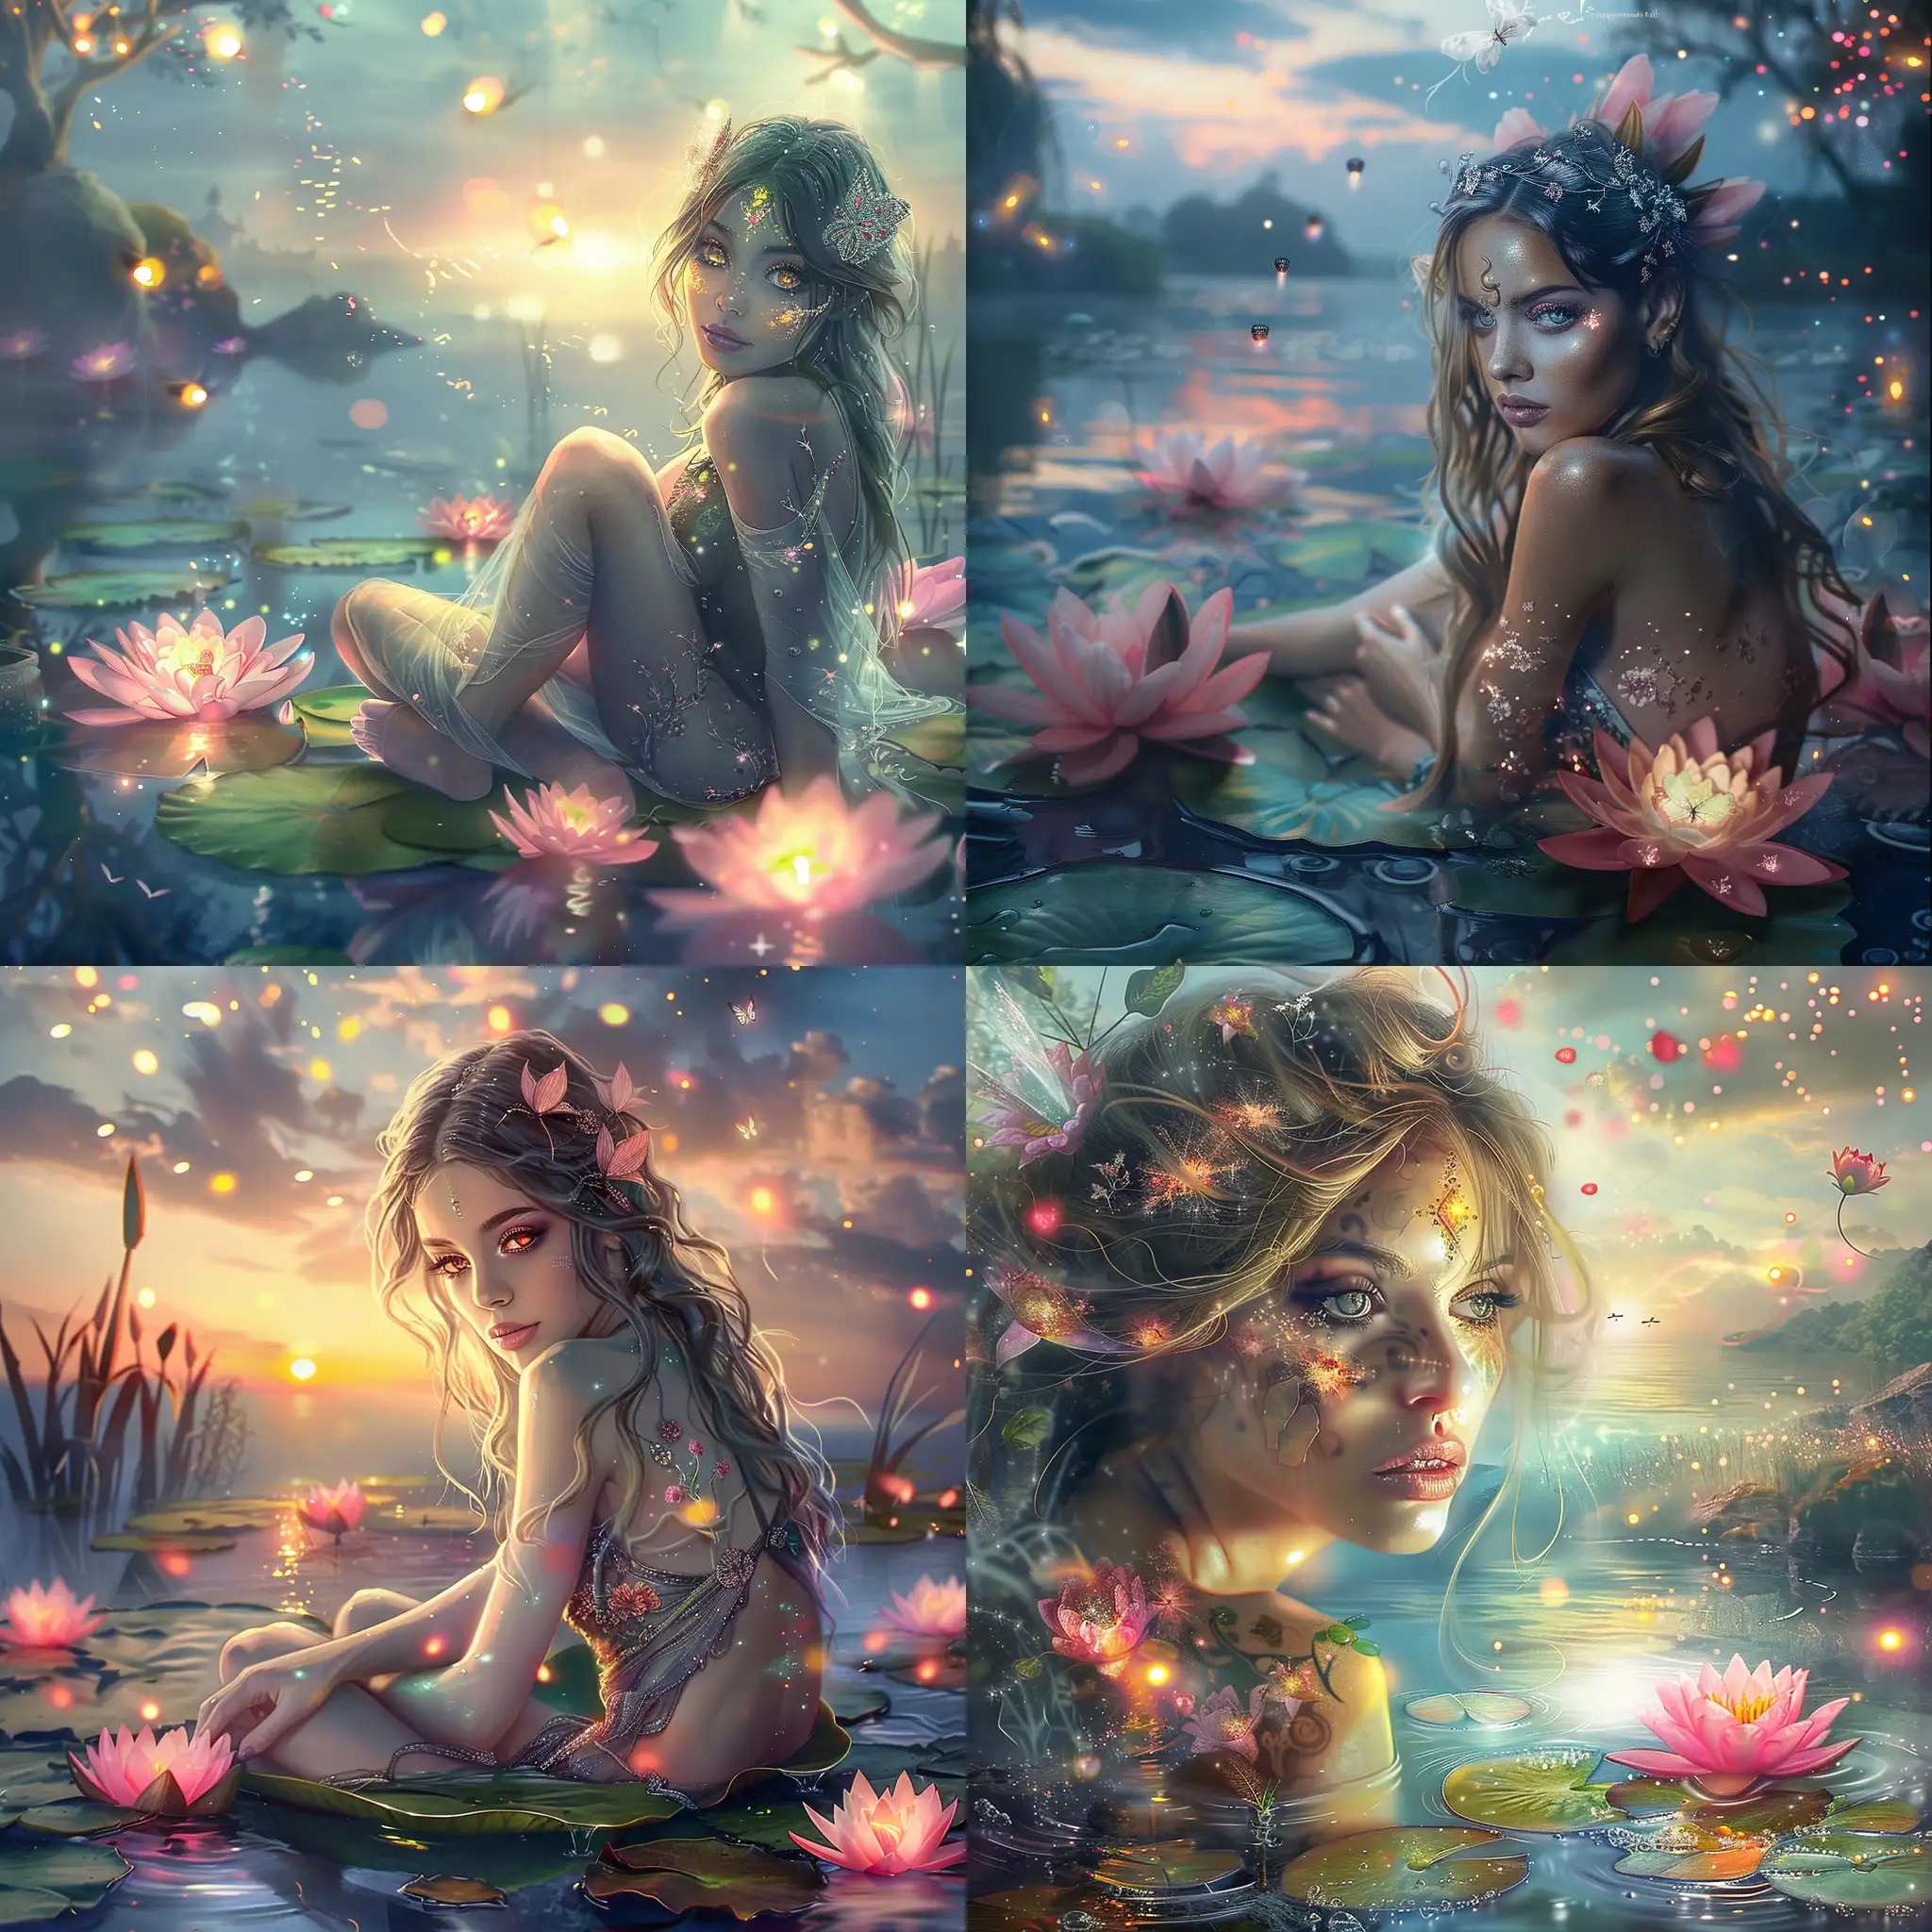 Enchanting-Water-Nymph-Sitting-on-Glowing-Lily-Pad-in-Magical-Lake